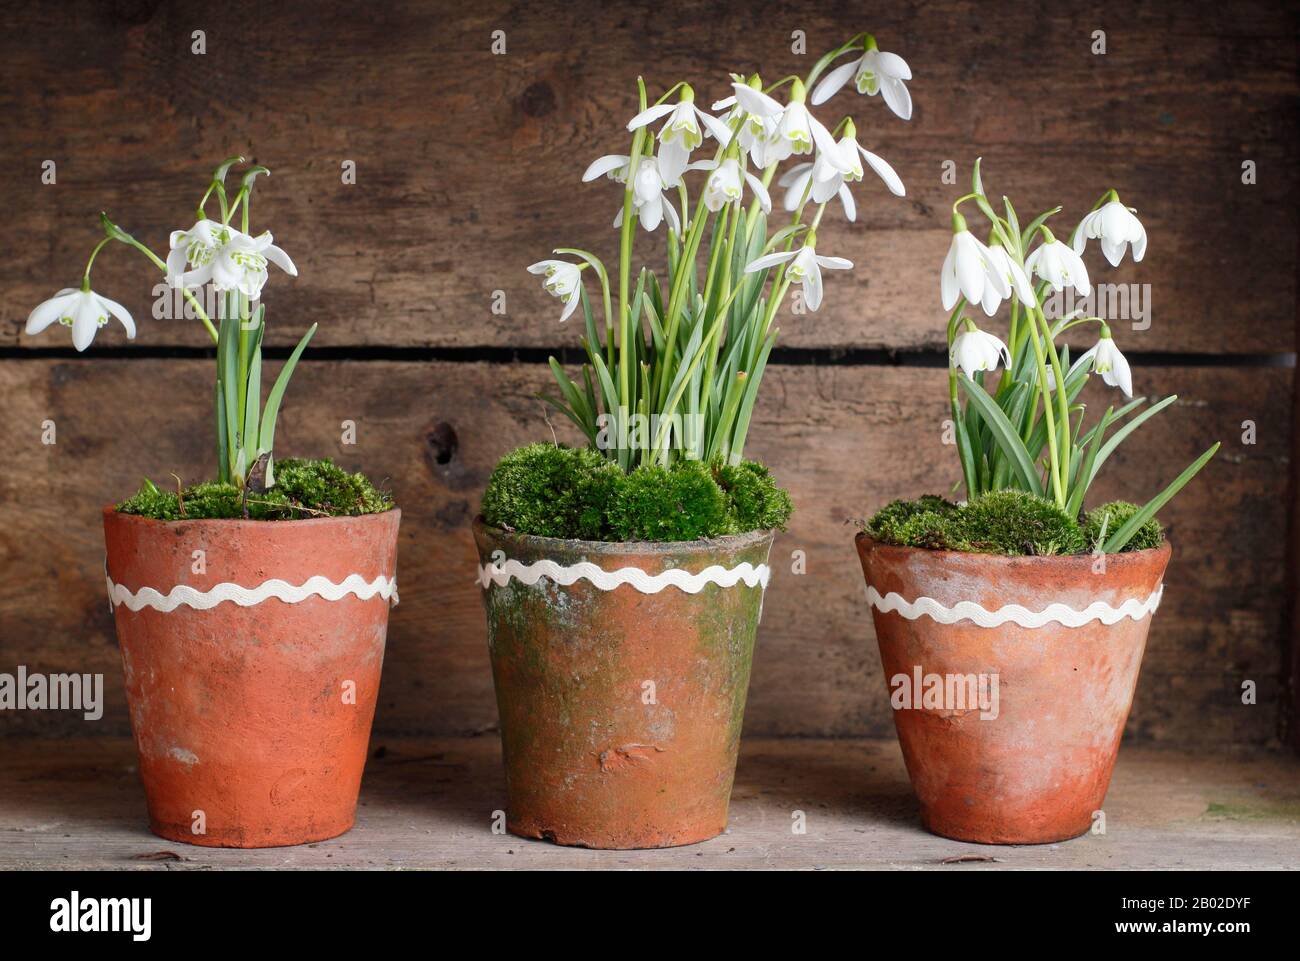 Galanthus nivalis. Snowdrops, in clay pots topped with moss, displayed in wooden crate in an English garden Stock Photo